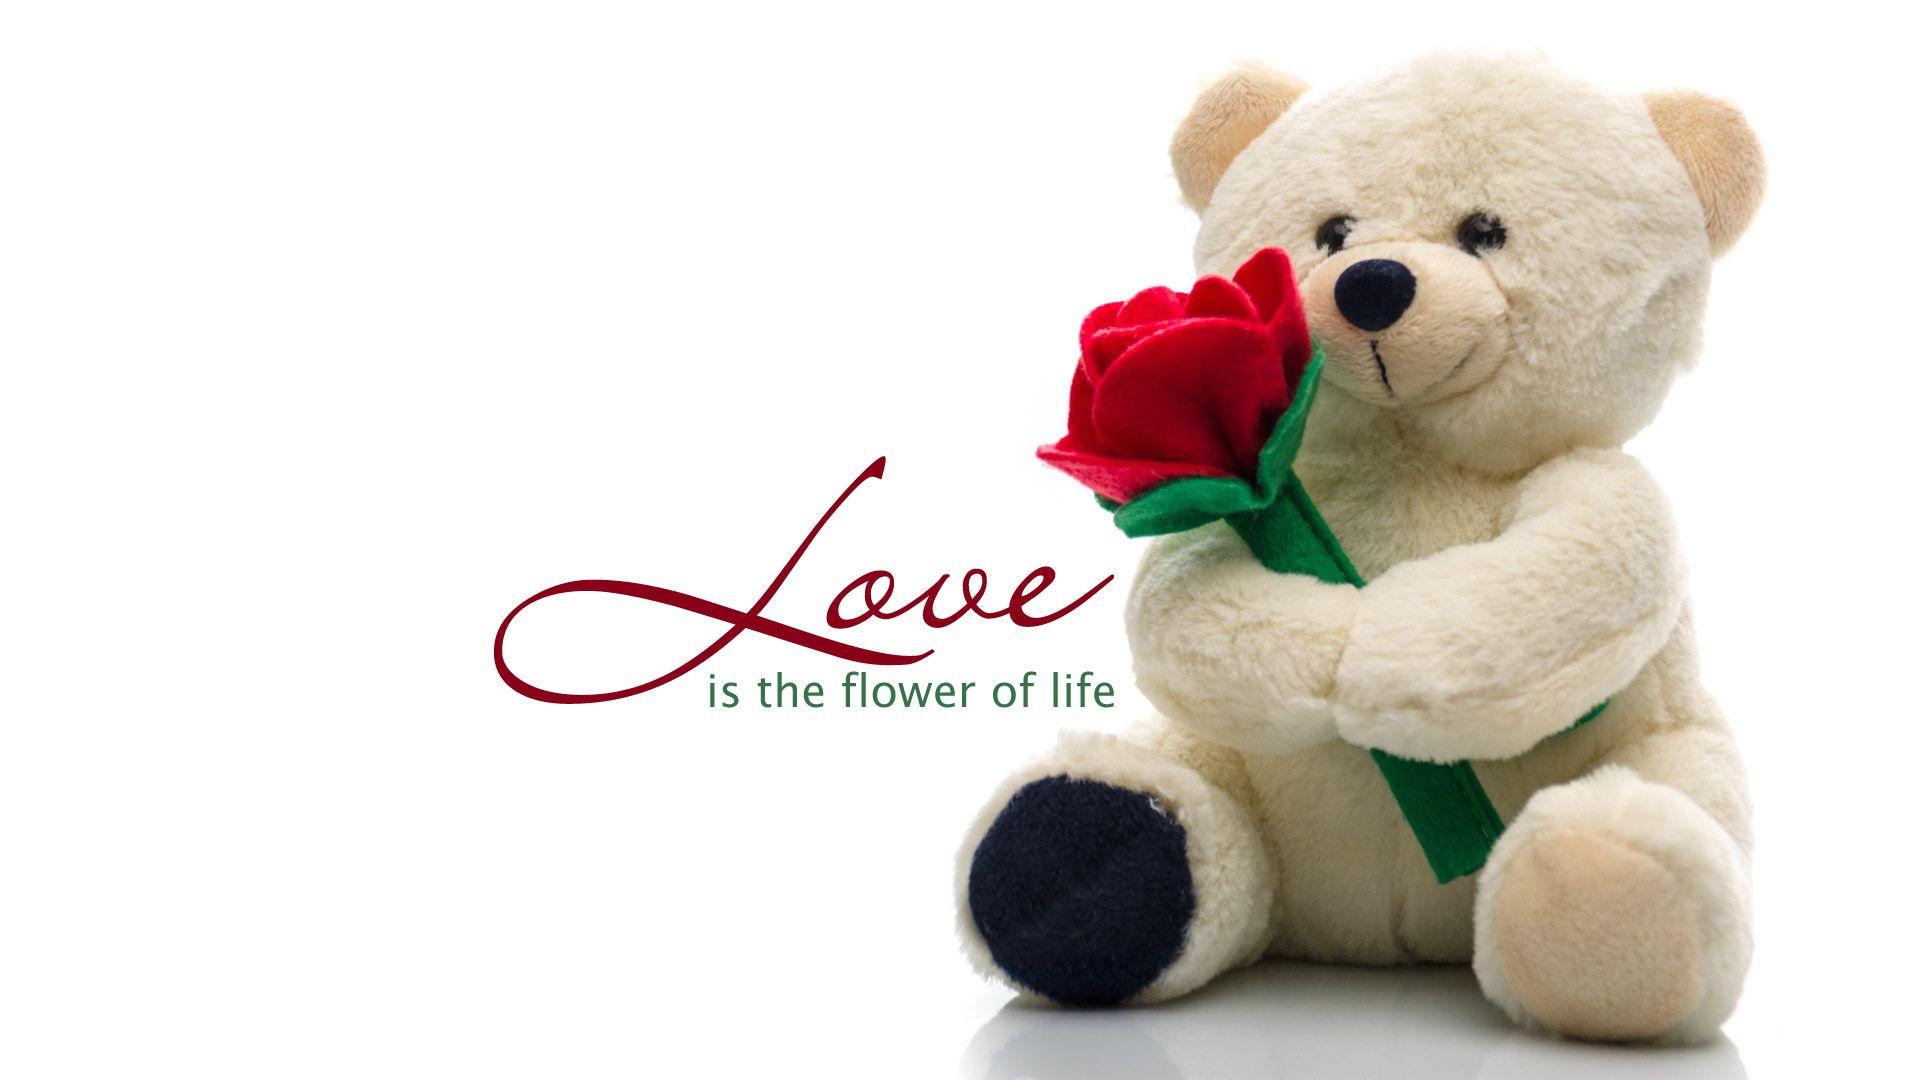 Teddy Bear Lovely, Cute And Beautiful Image & Photo